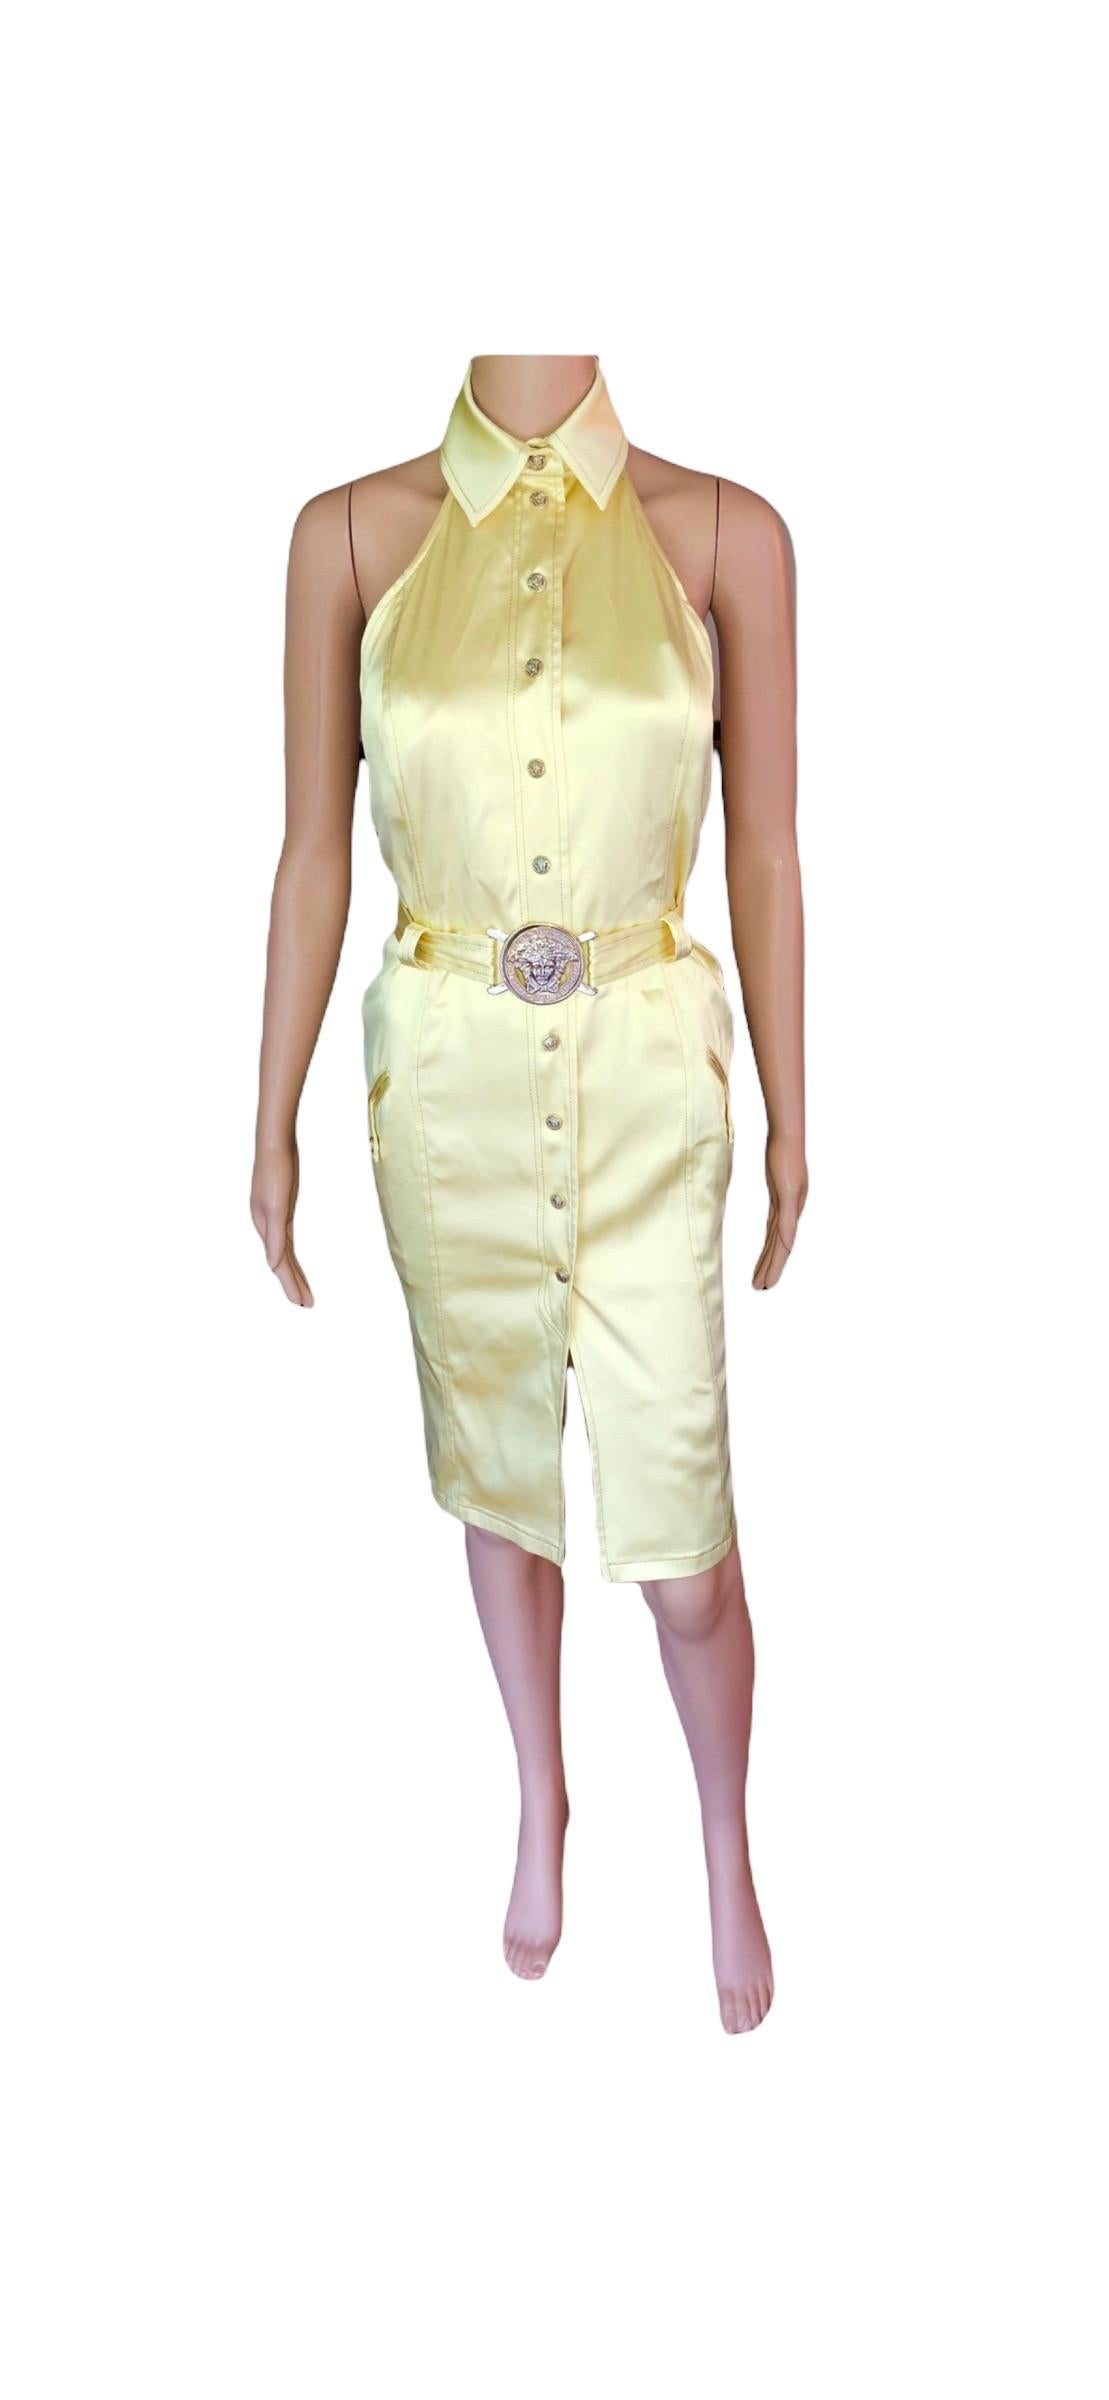 Versace S/S 2005 Runway Logo Belted Cutout Back Dress In Excellent Condition For Sale In Naples, FL